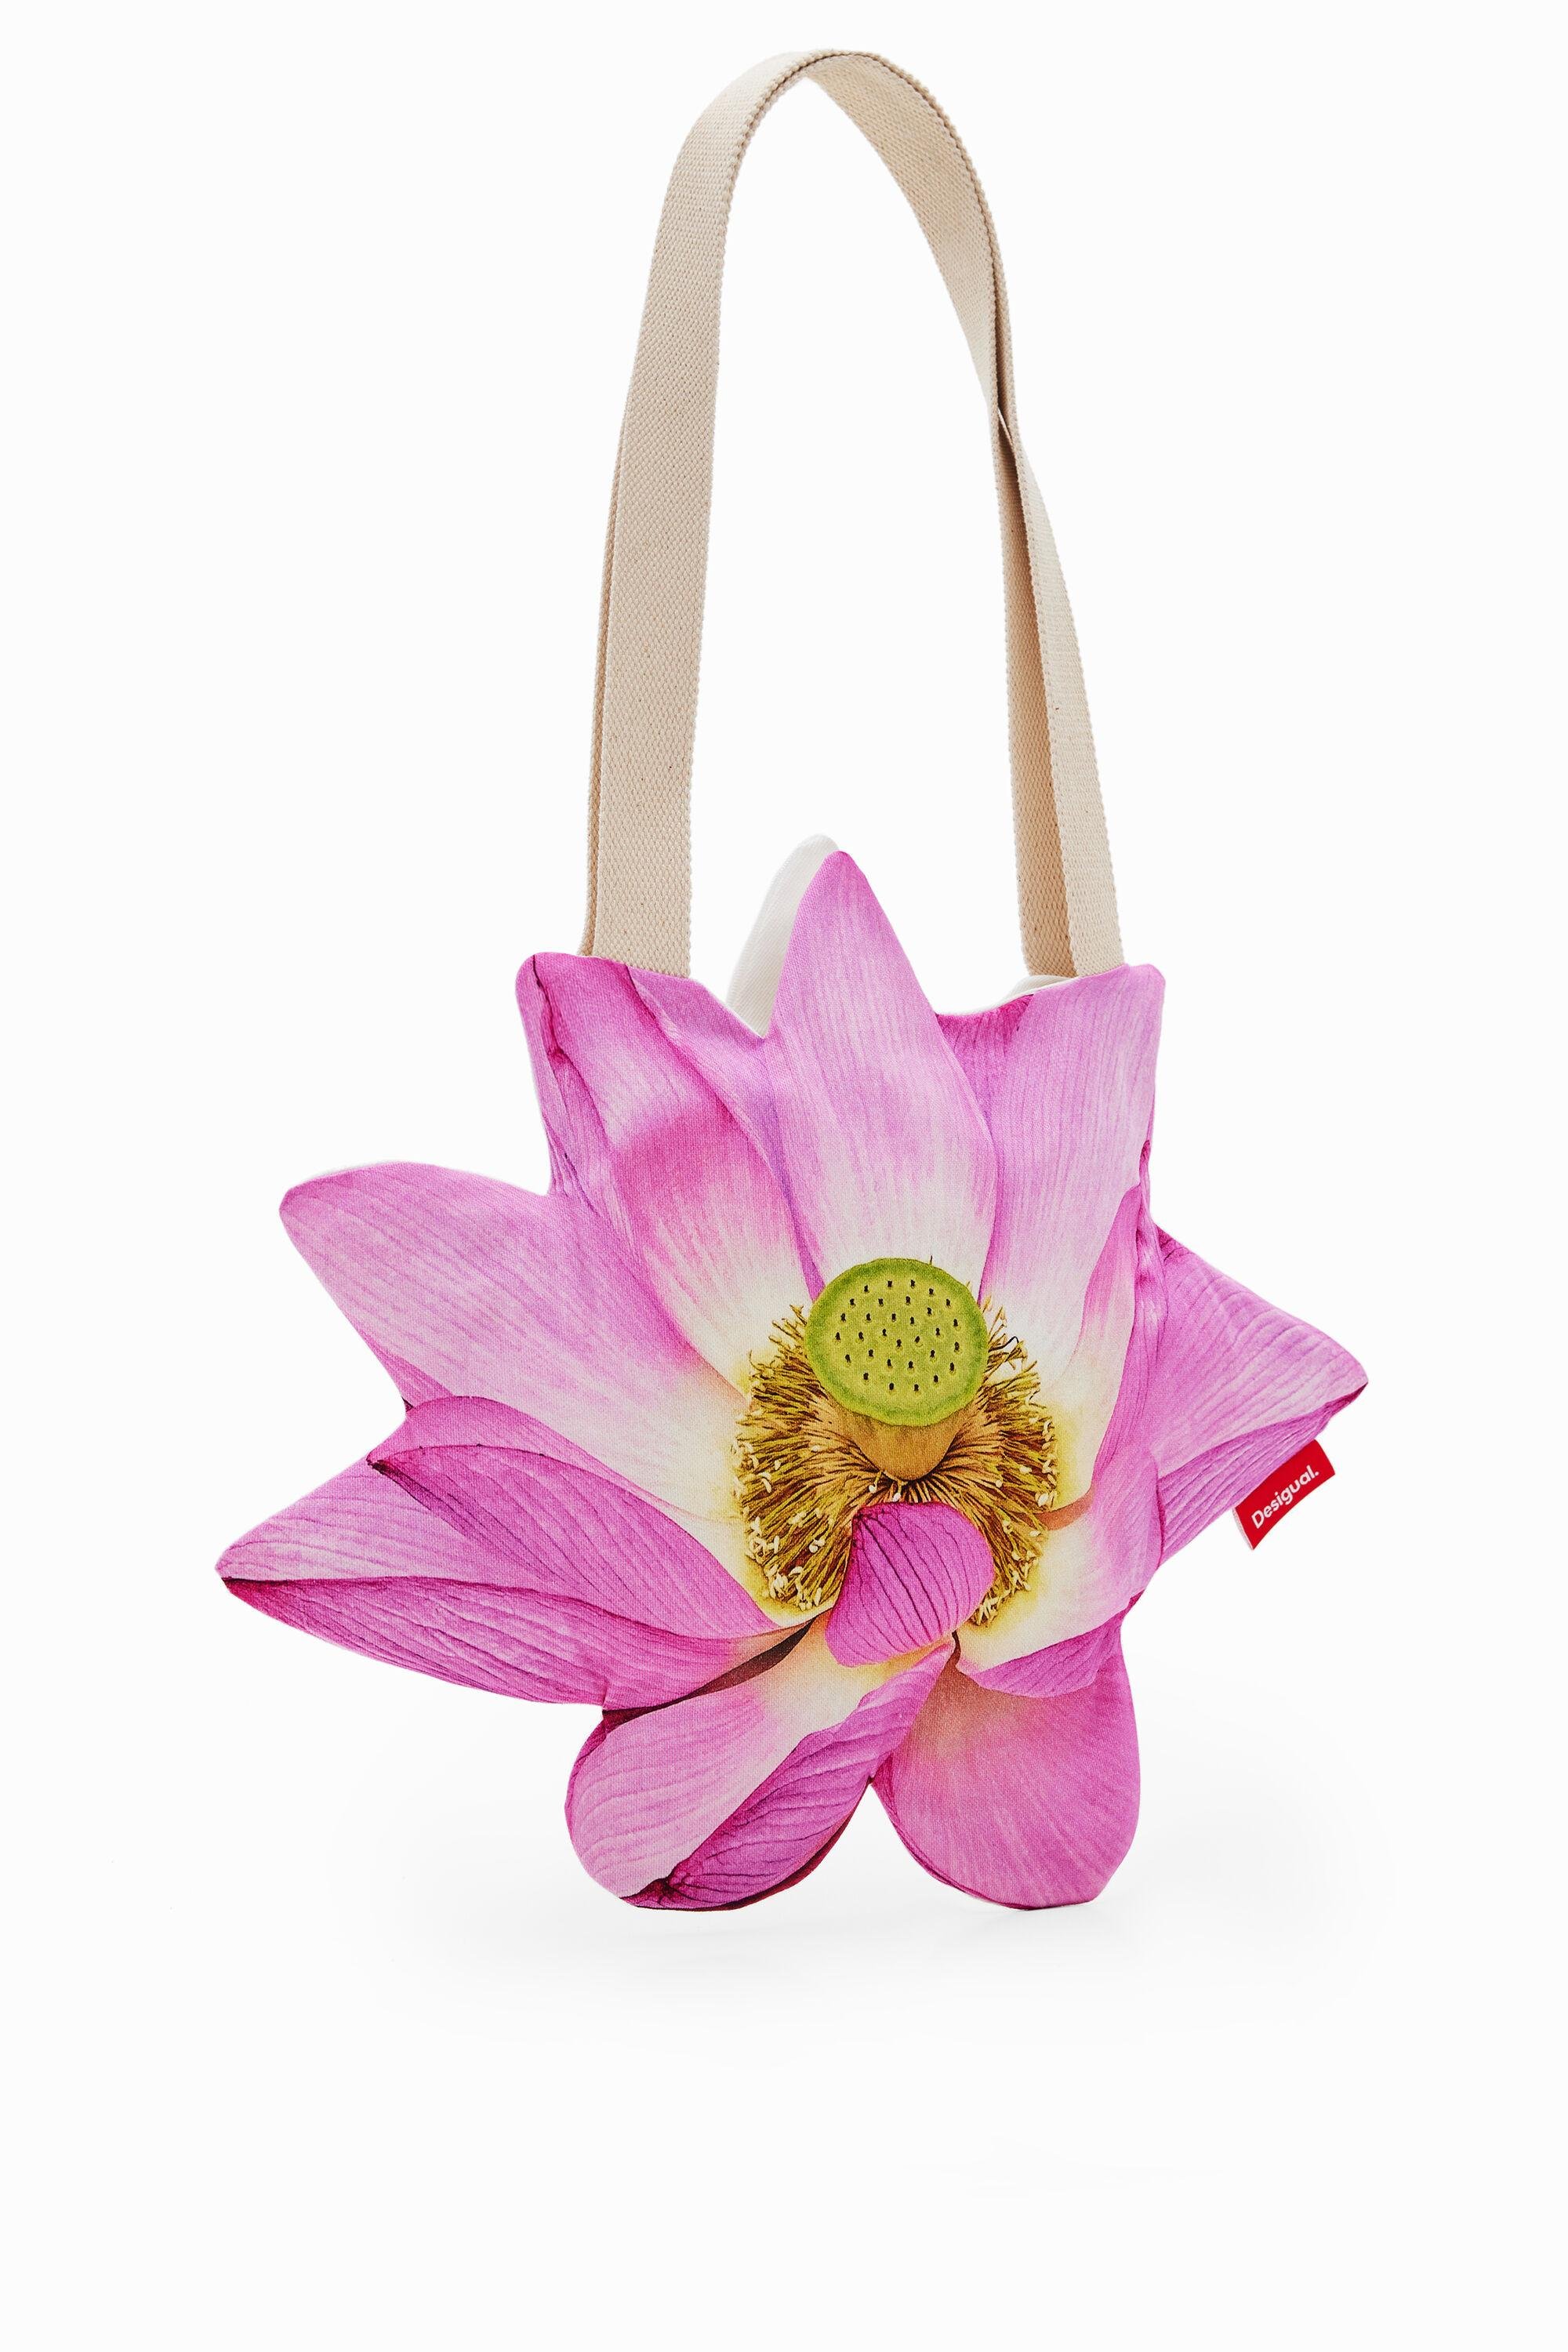 Tyler McGillivary water lily tote bag by DESIGUAL